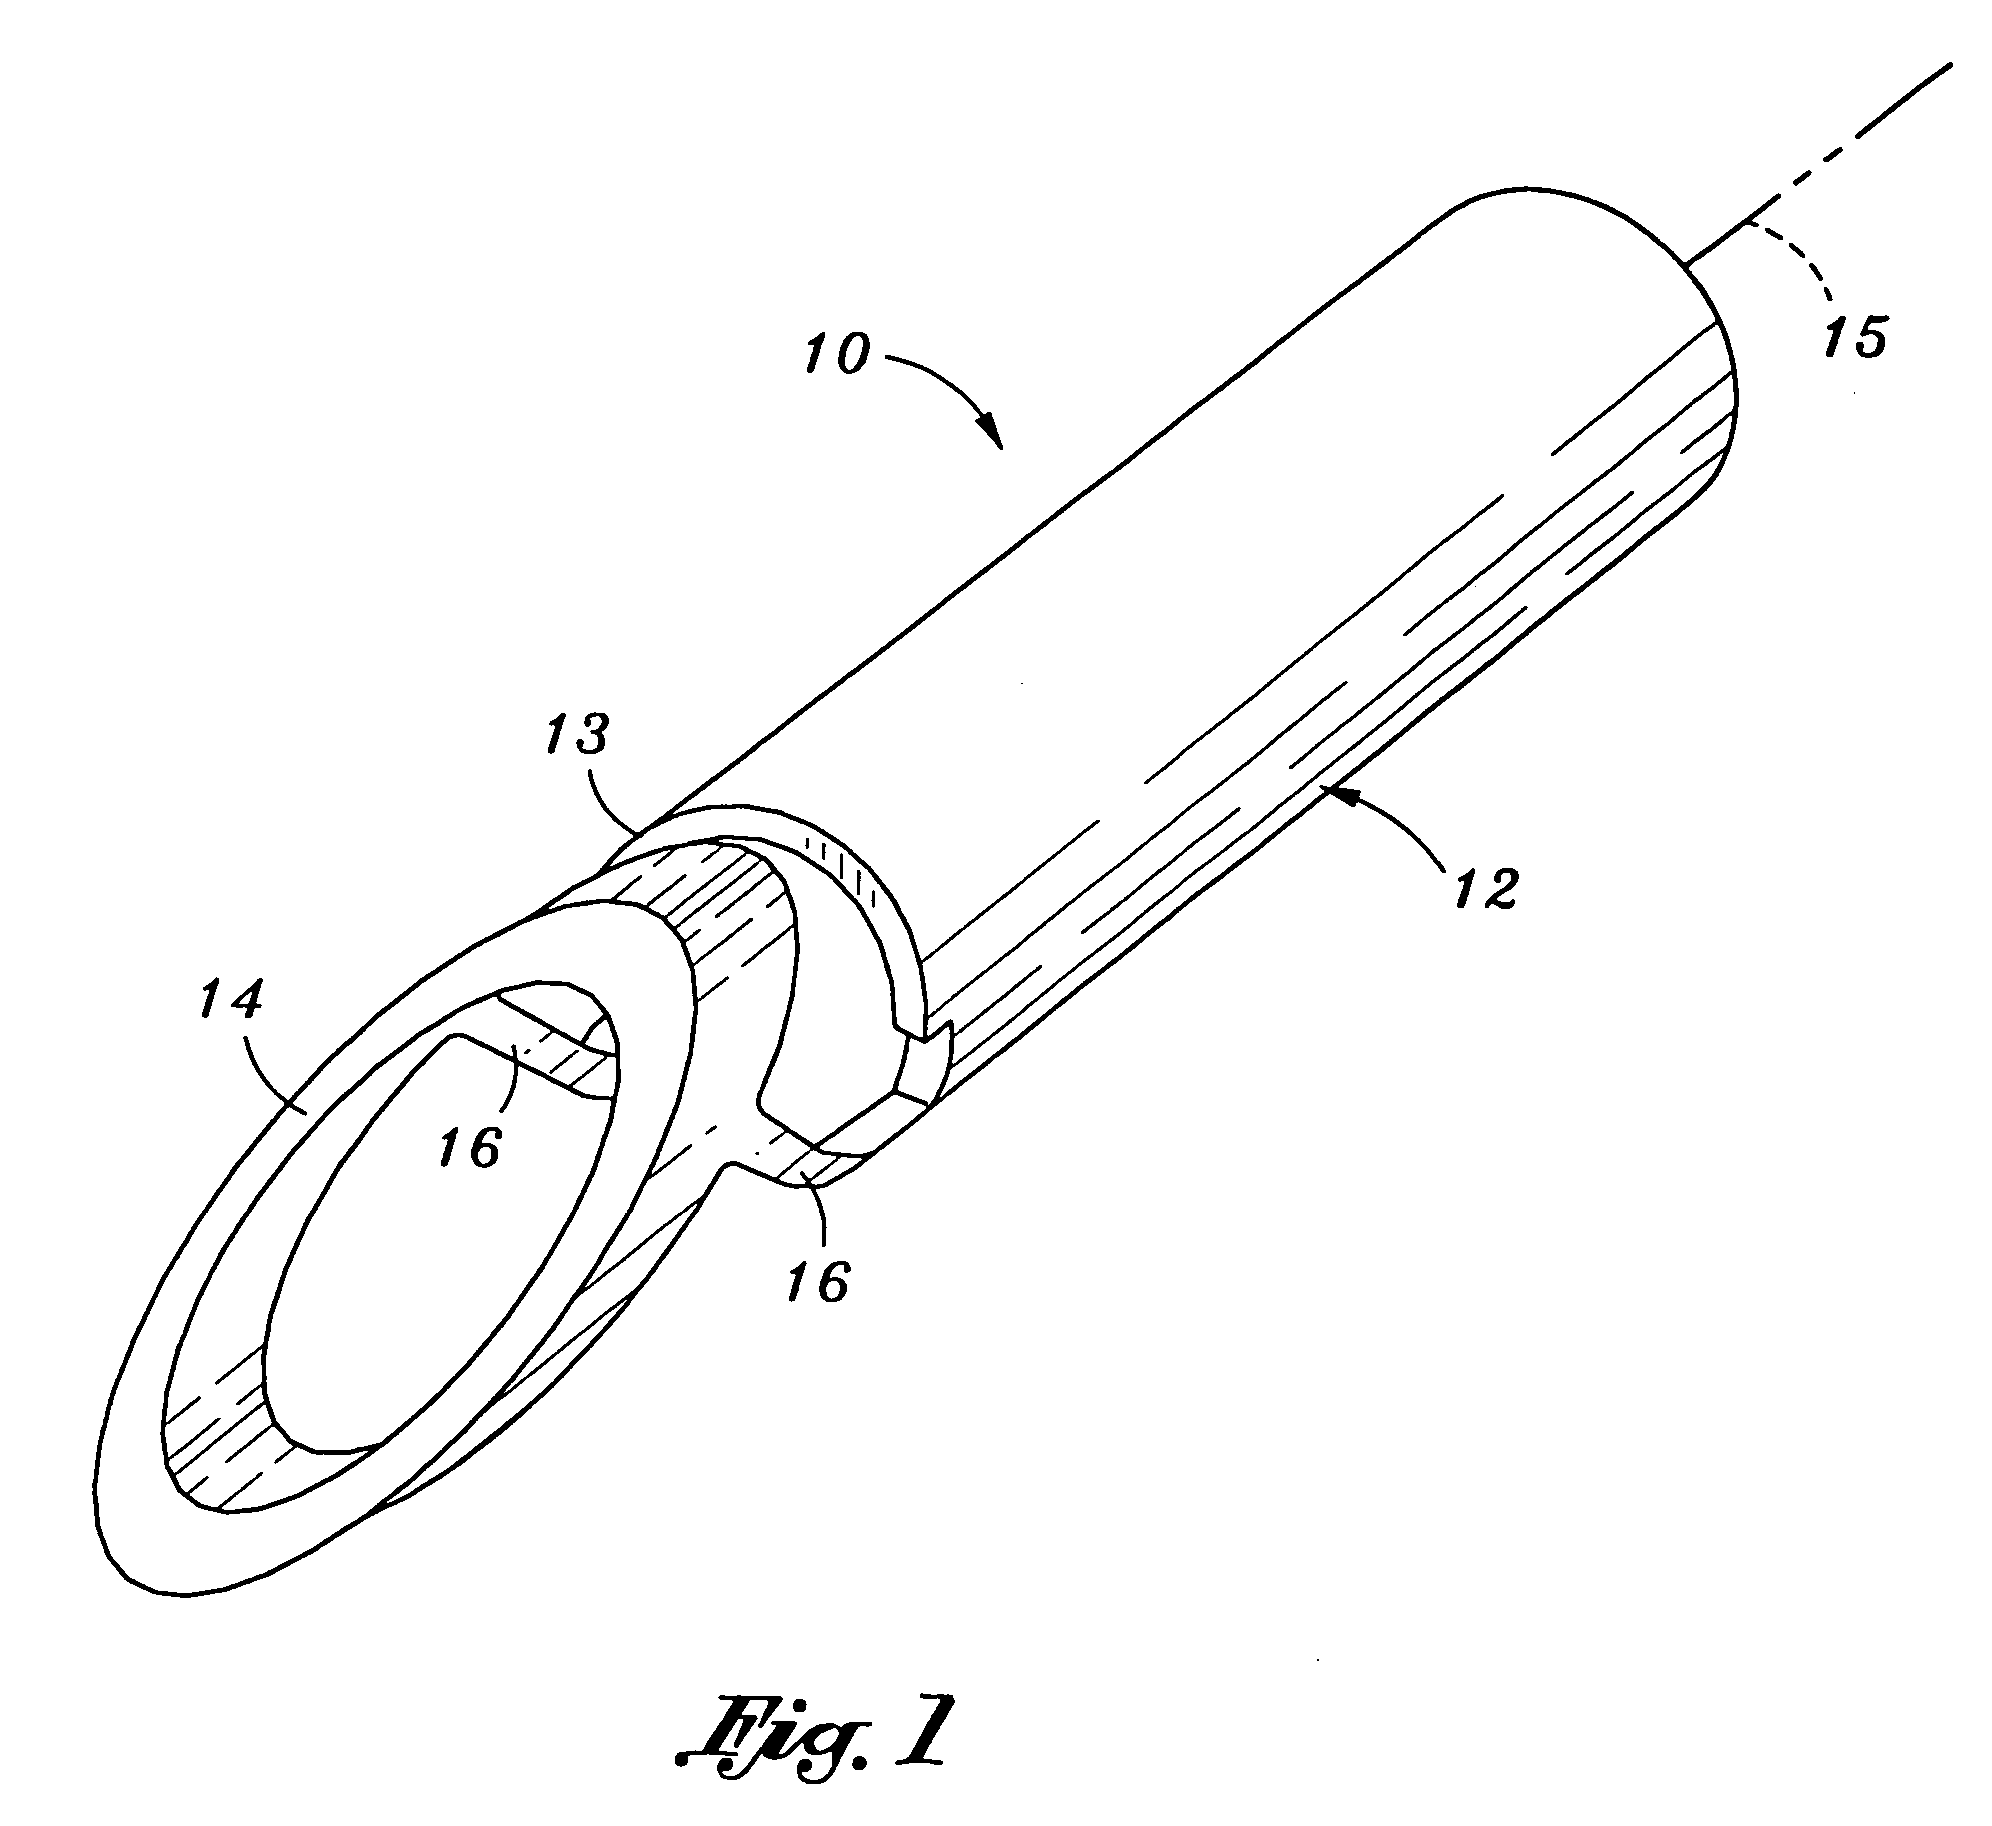 Bone anchor device having toggle member for attaching connective tissues to bone